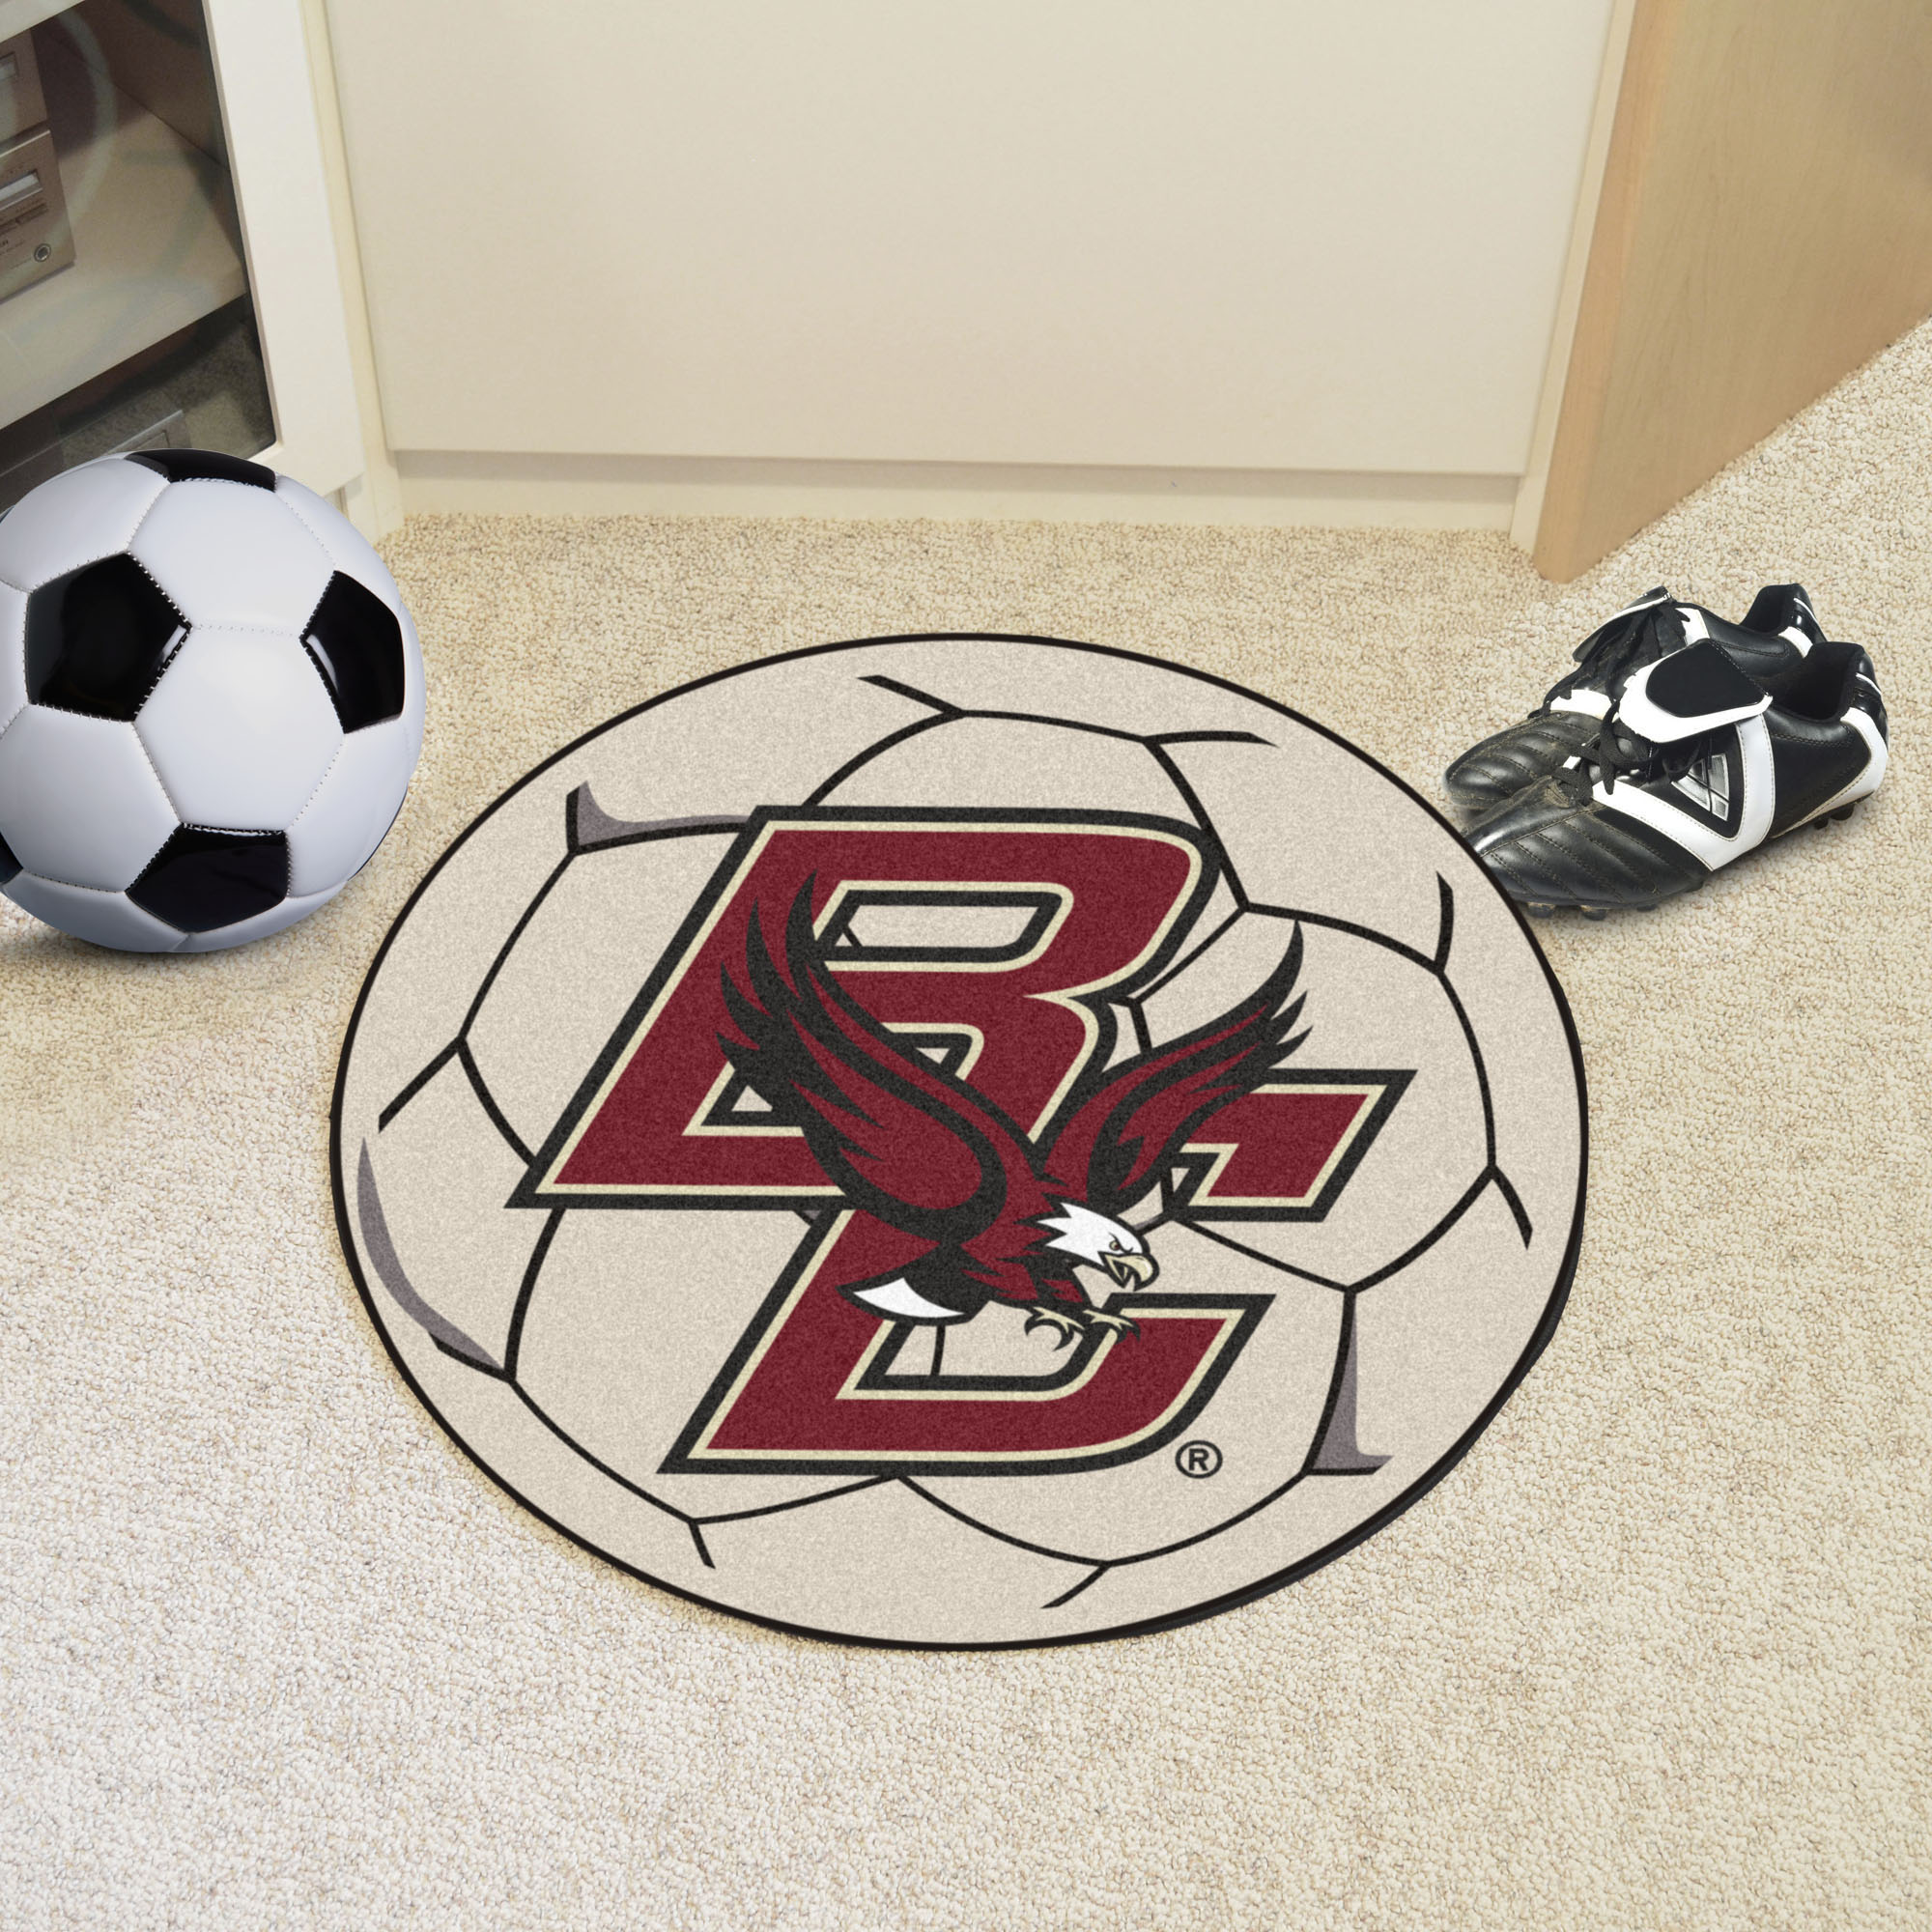 Boston College Ball-Shaped Area Rugs (Ball Shaped Area Rugs: Soccer Ball)